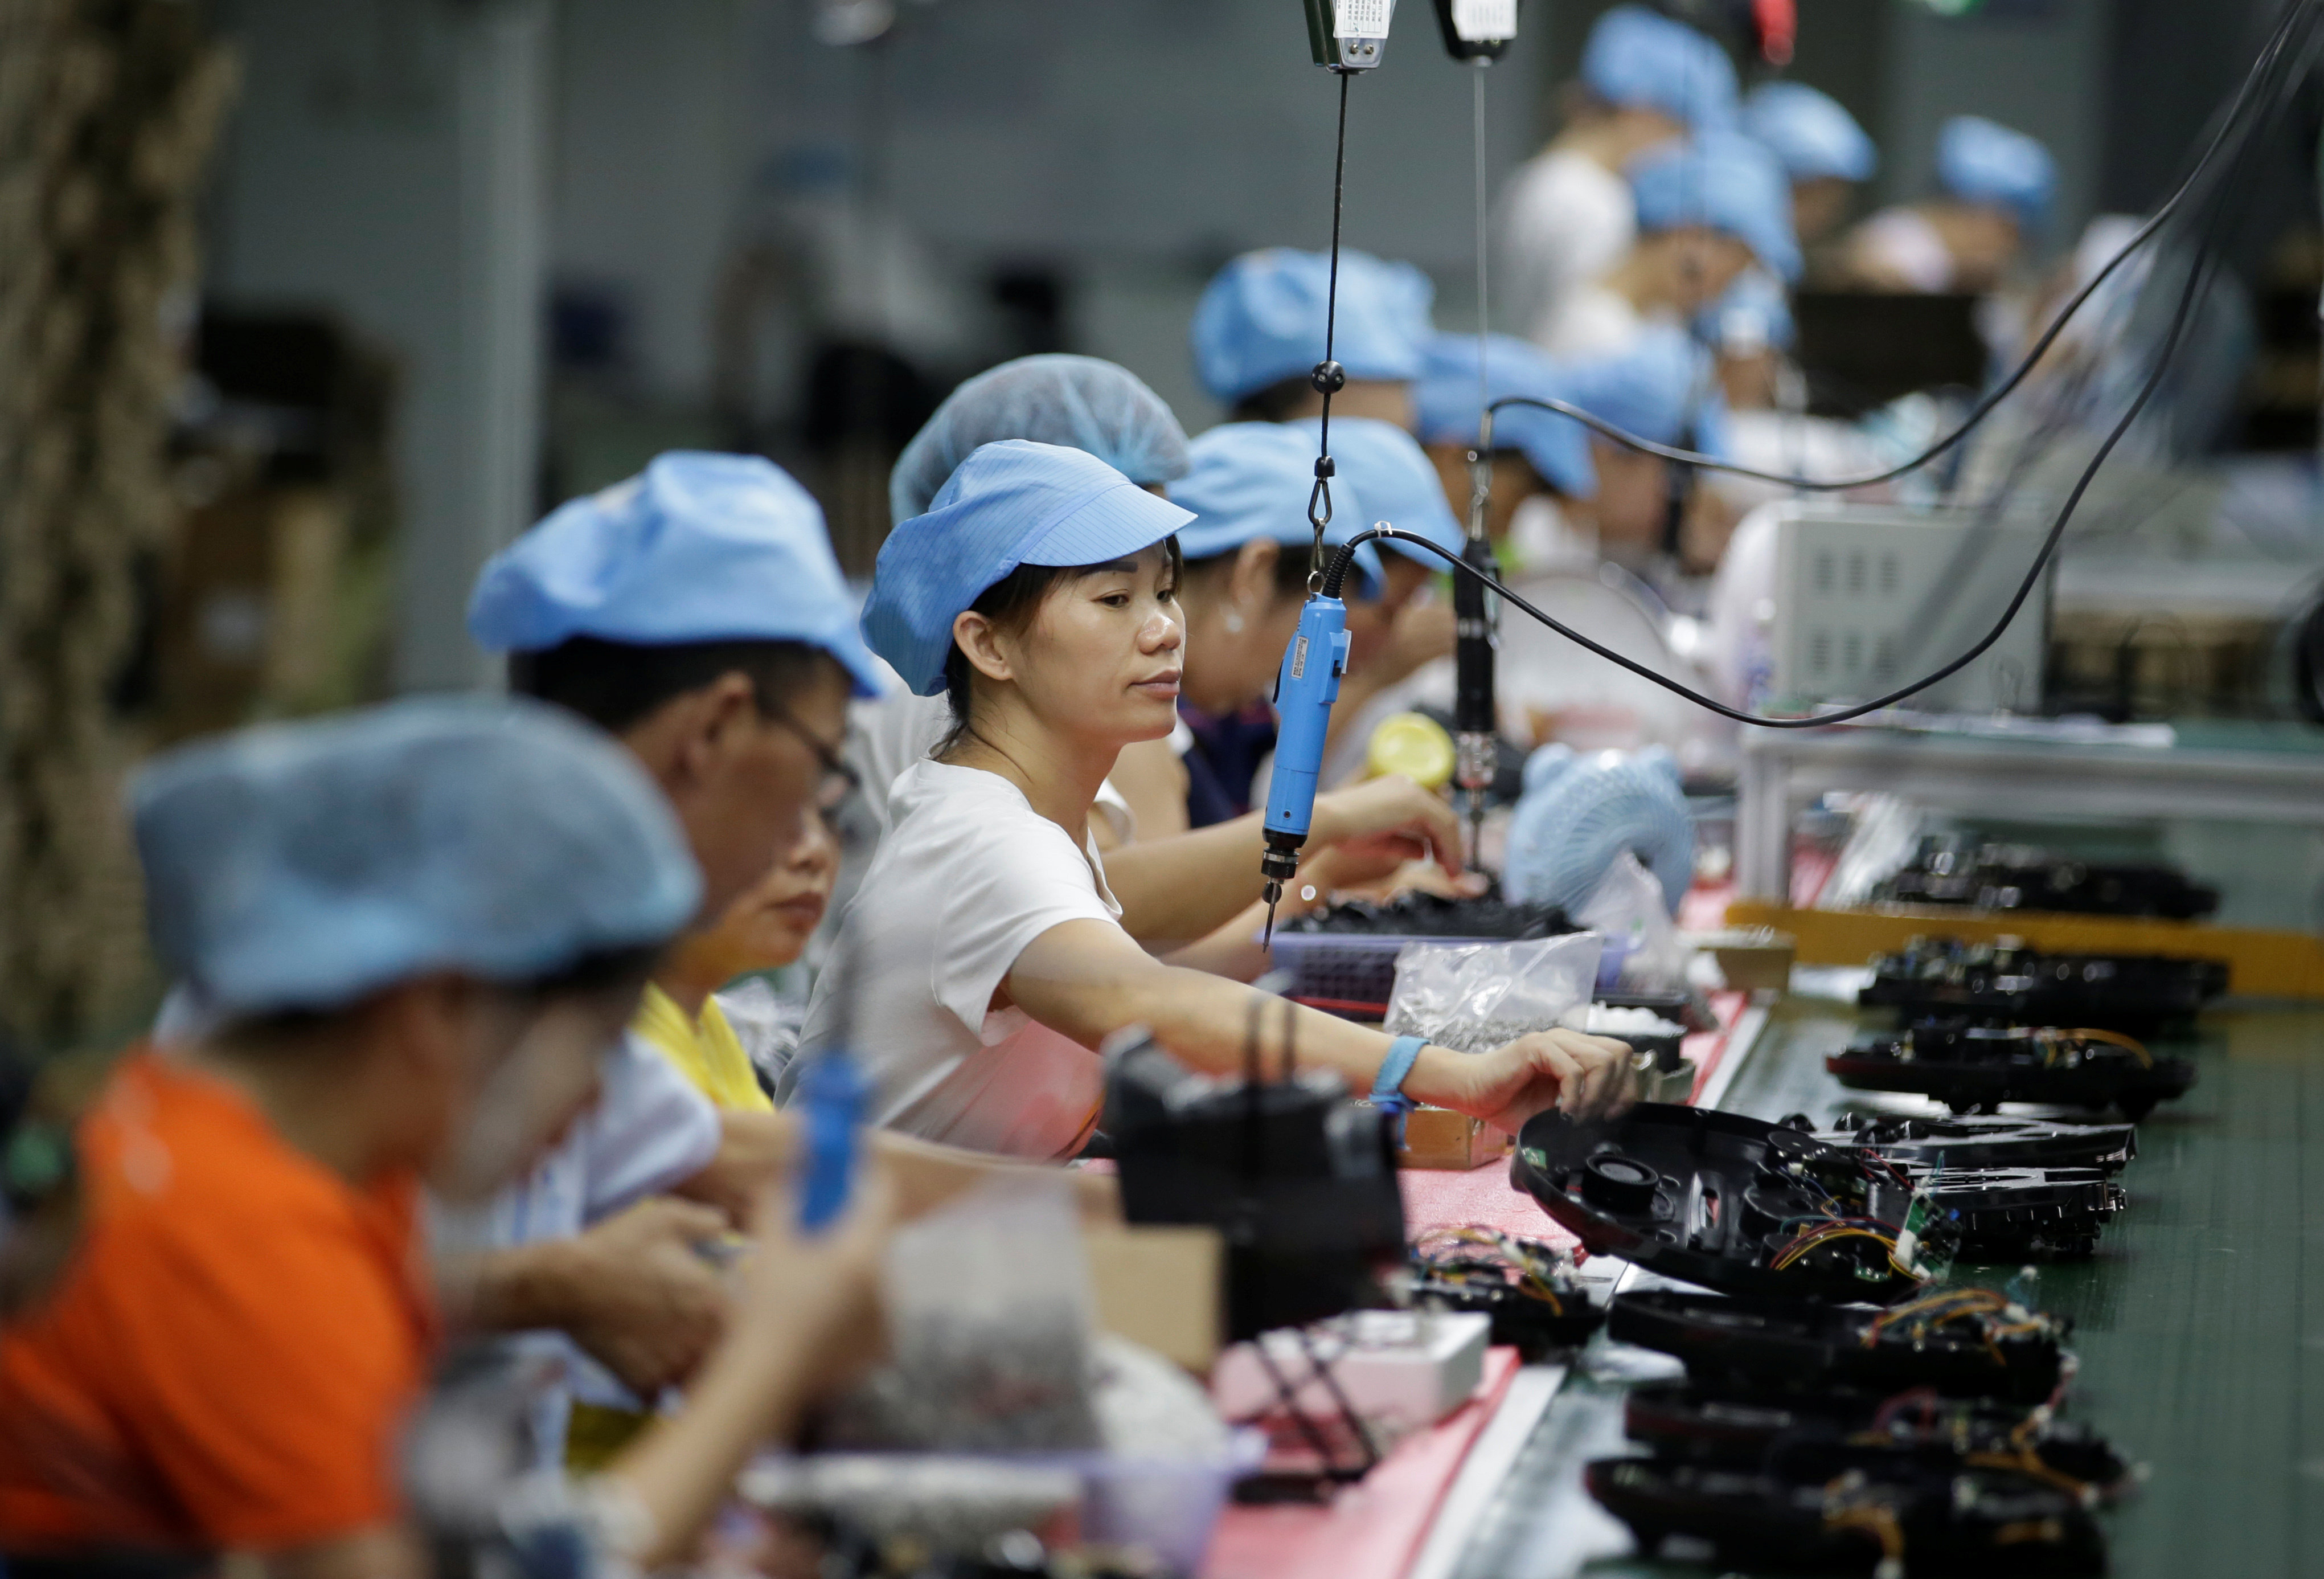 Employees work on the production line of a robot vacuum cleaner factory in Shenzhen in August 2019. China’s producer price index soared by 6.8 per cent year on year in April, reaching its highest level since October 2017. Photo: Reuters